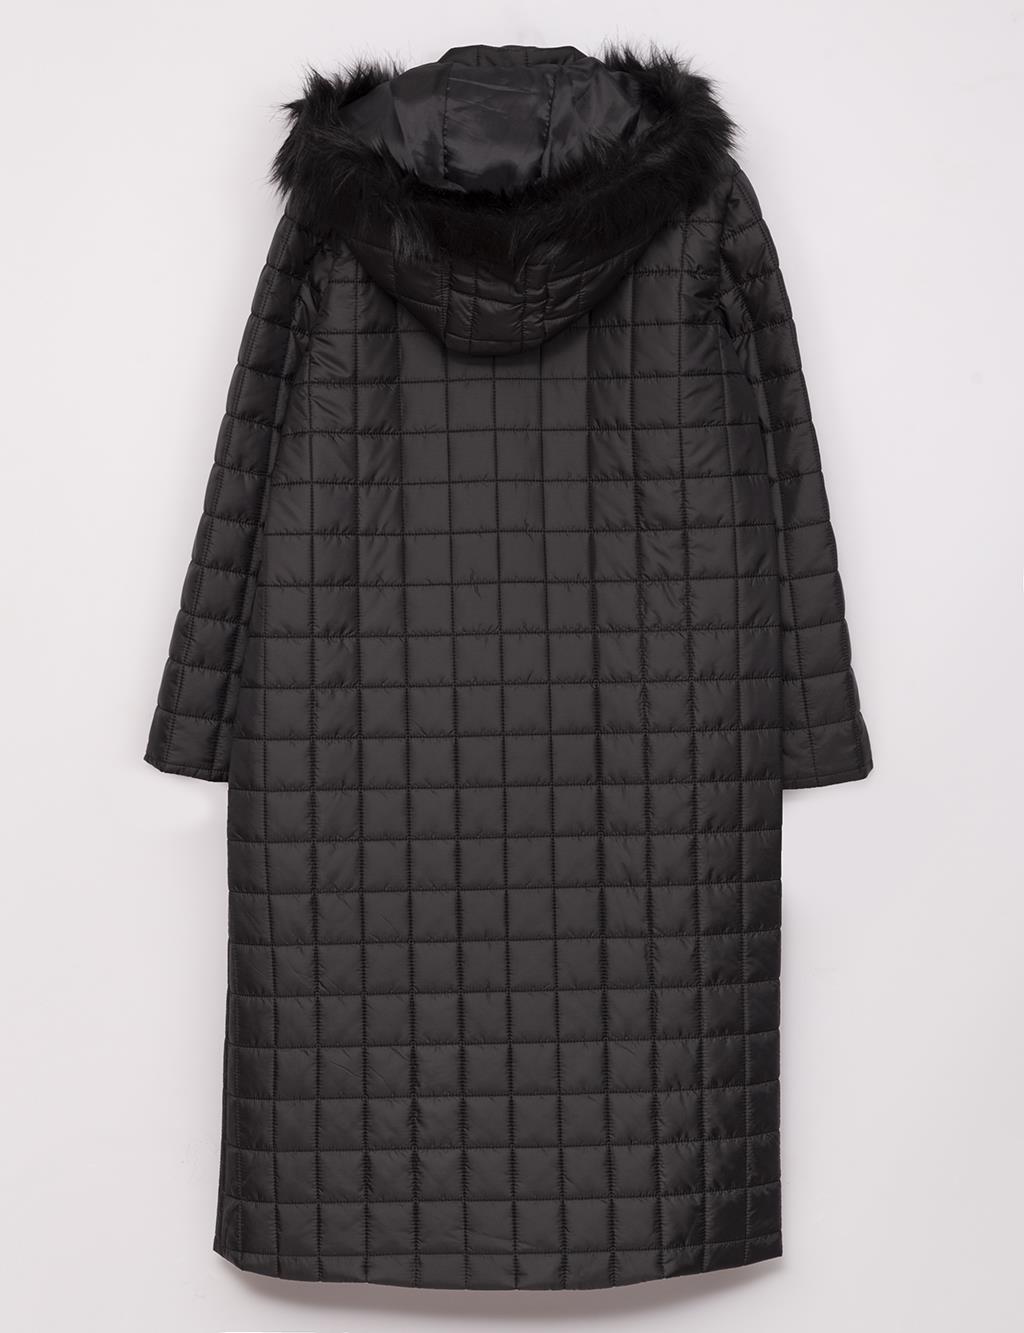 Fur Hooded Checkered Quilted Coat Black